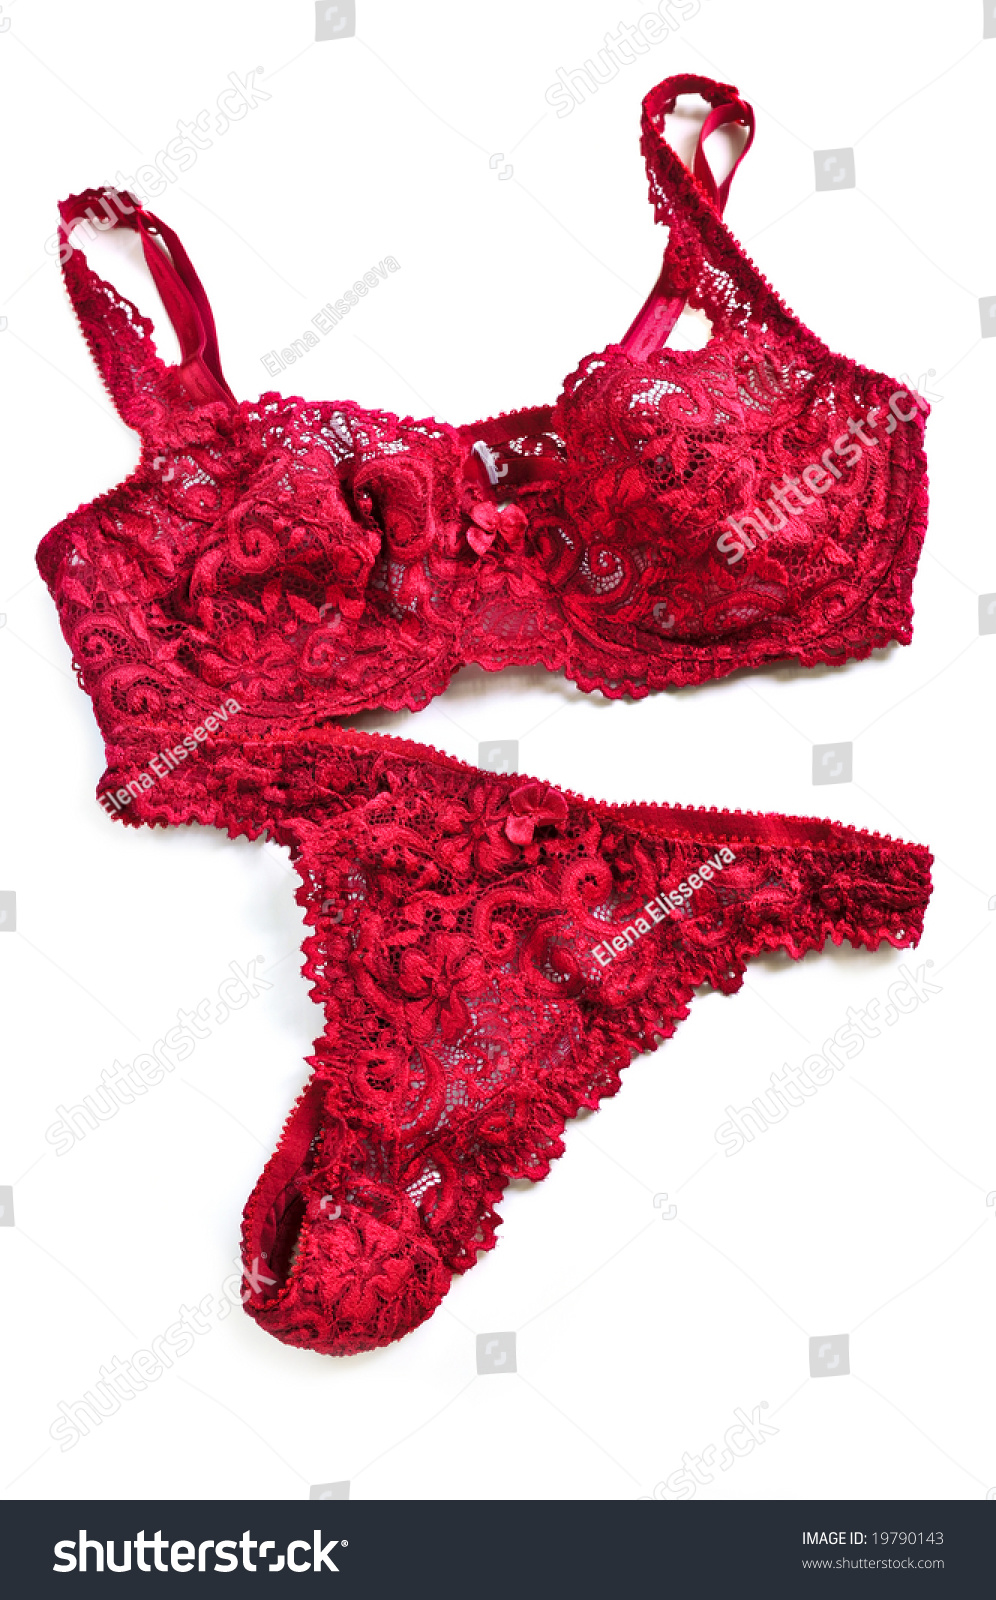 Sexy Lace Lingerie Isolated On White Background Stock Photo 19790143 ...